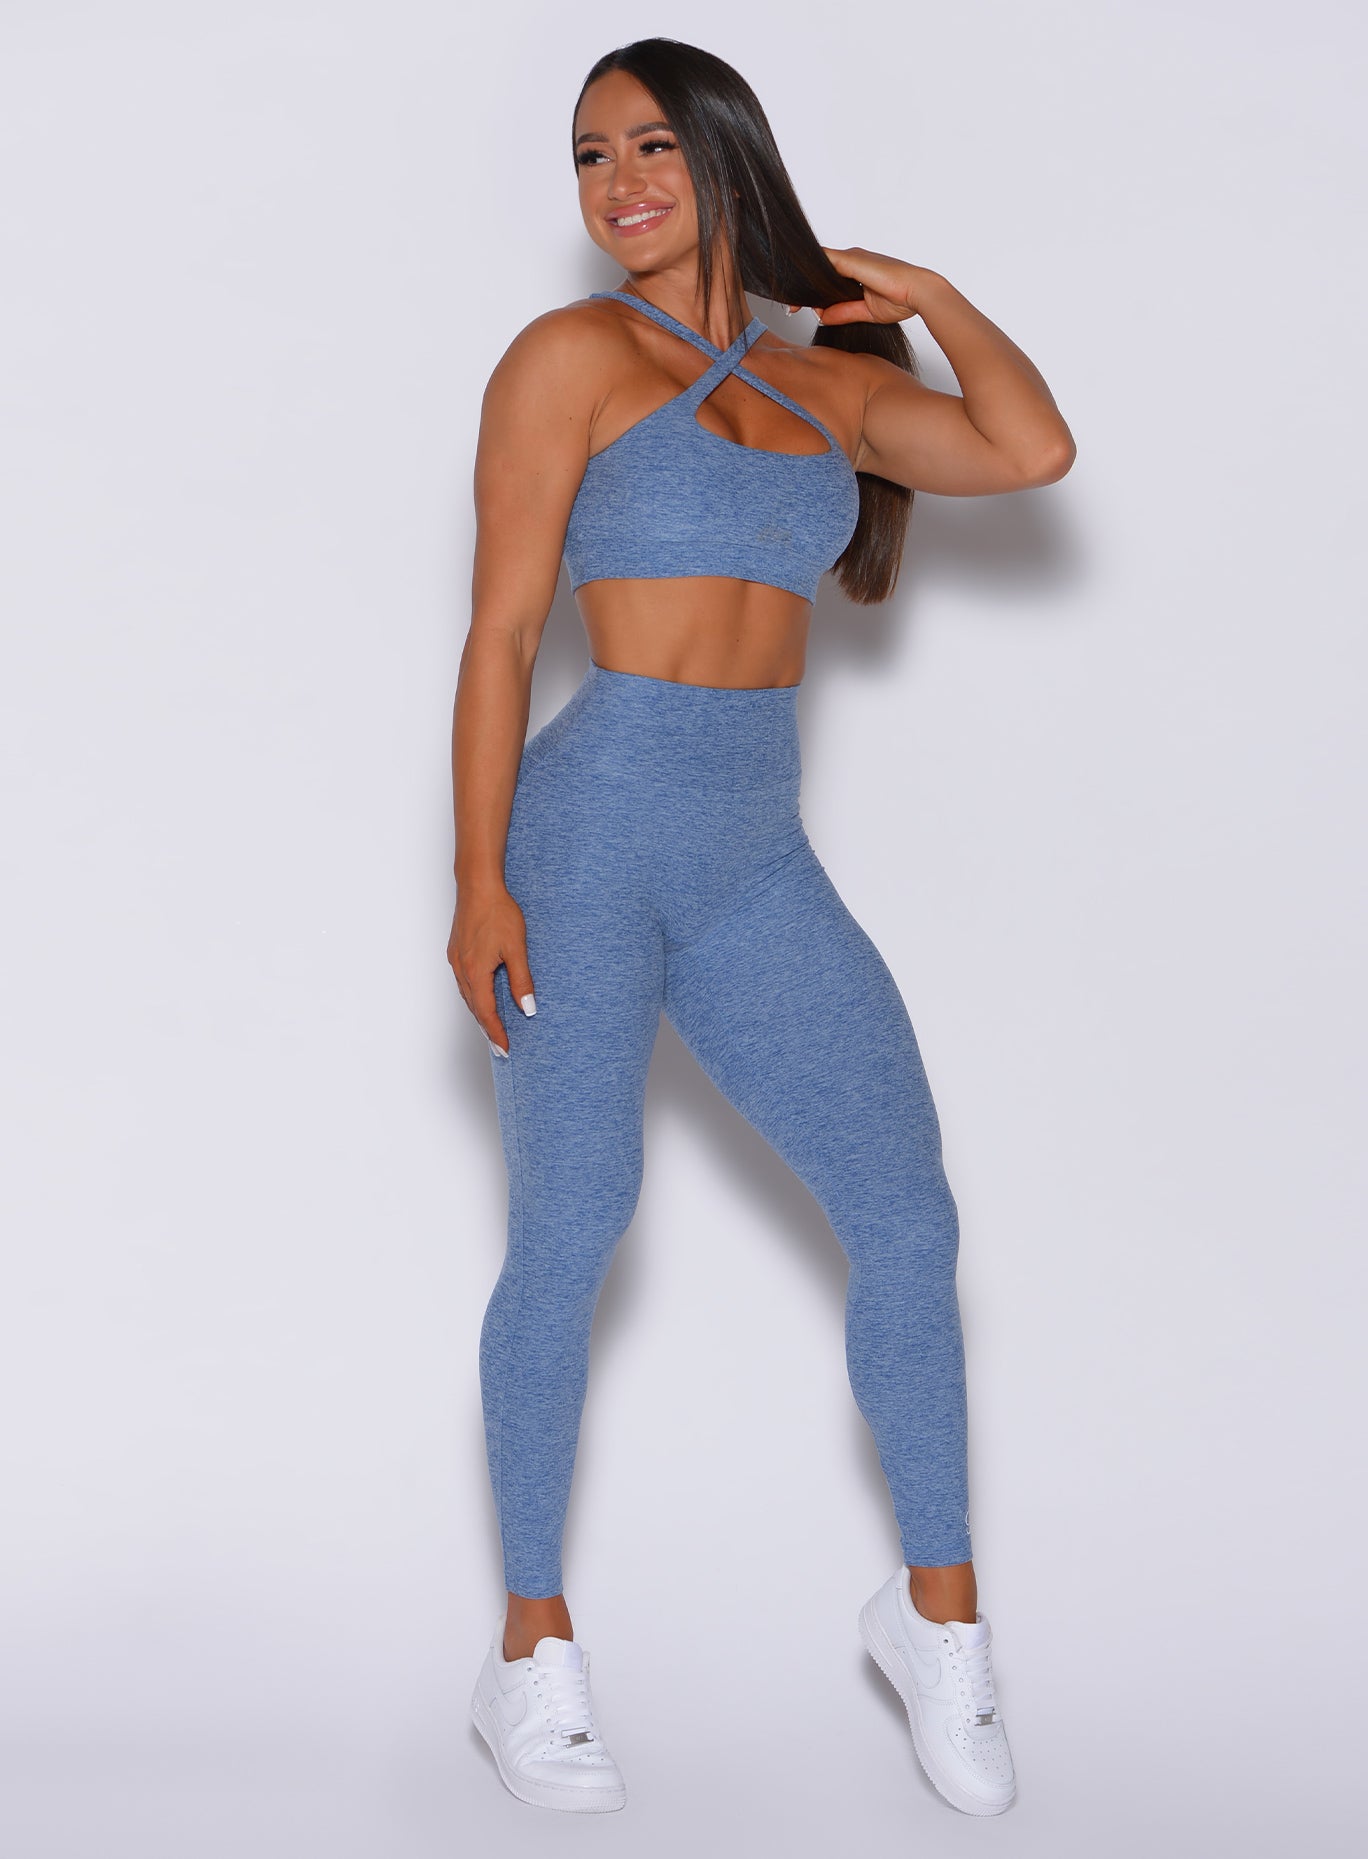 Front profile view of a model in our Pocket Pop Leggings in sky blue color and a matching two way sports bra